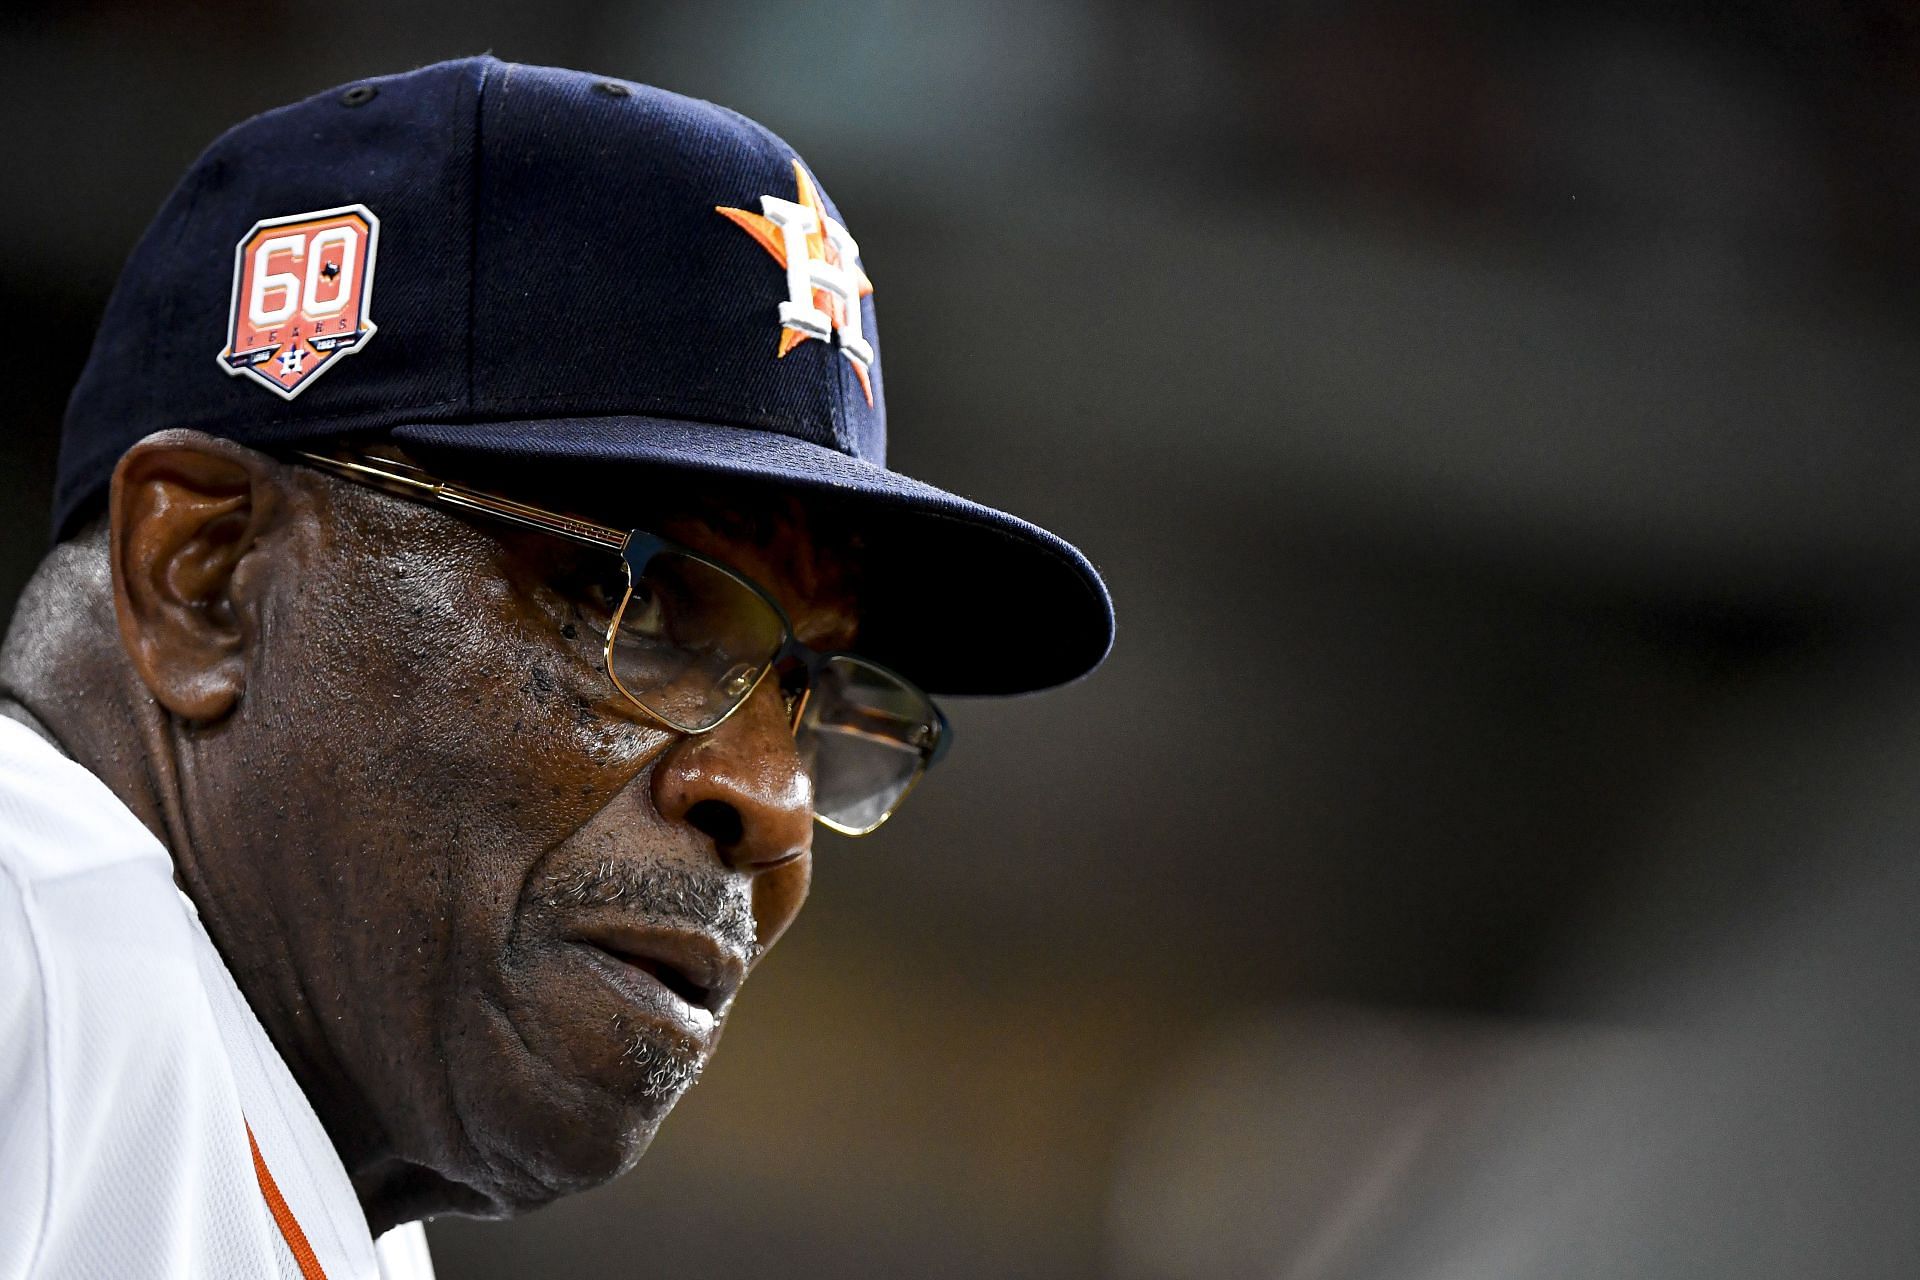 Dusty Baker Jr. #12 of the Houston Astros stands in the dugout during the second inning against the Kansas City Royals.